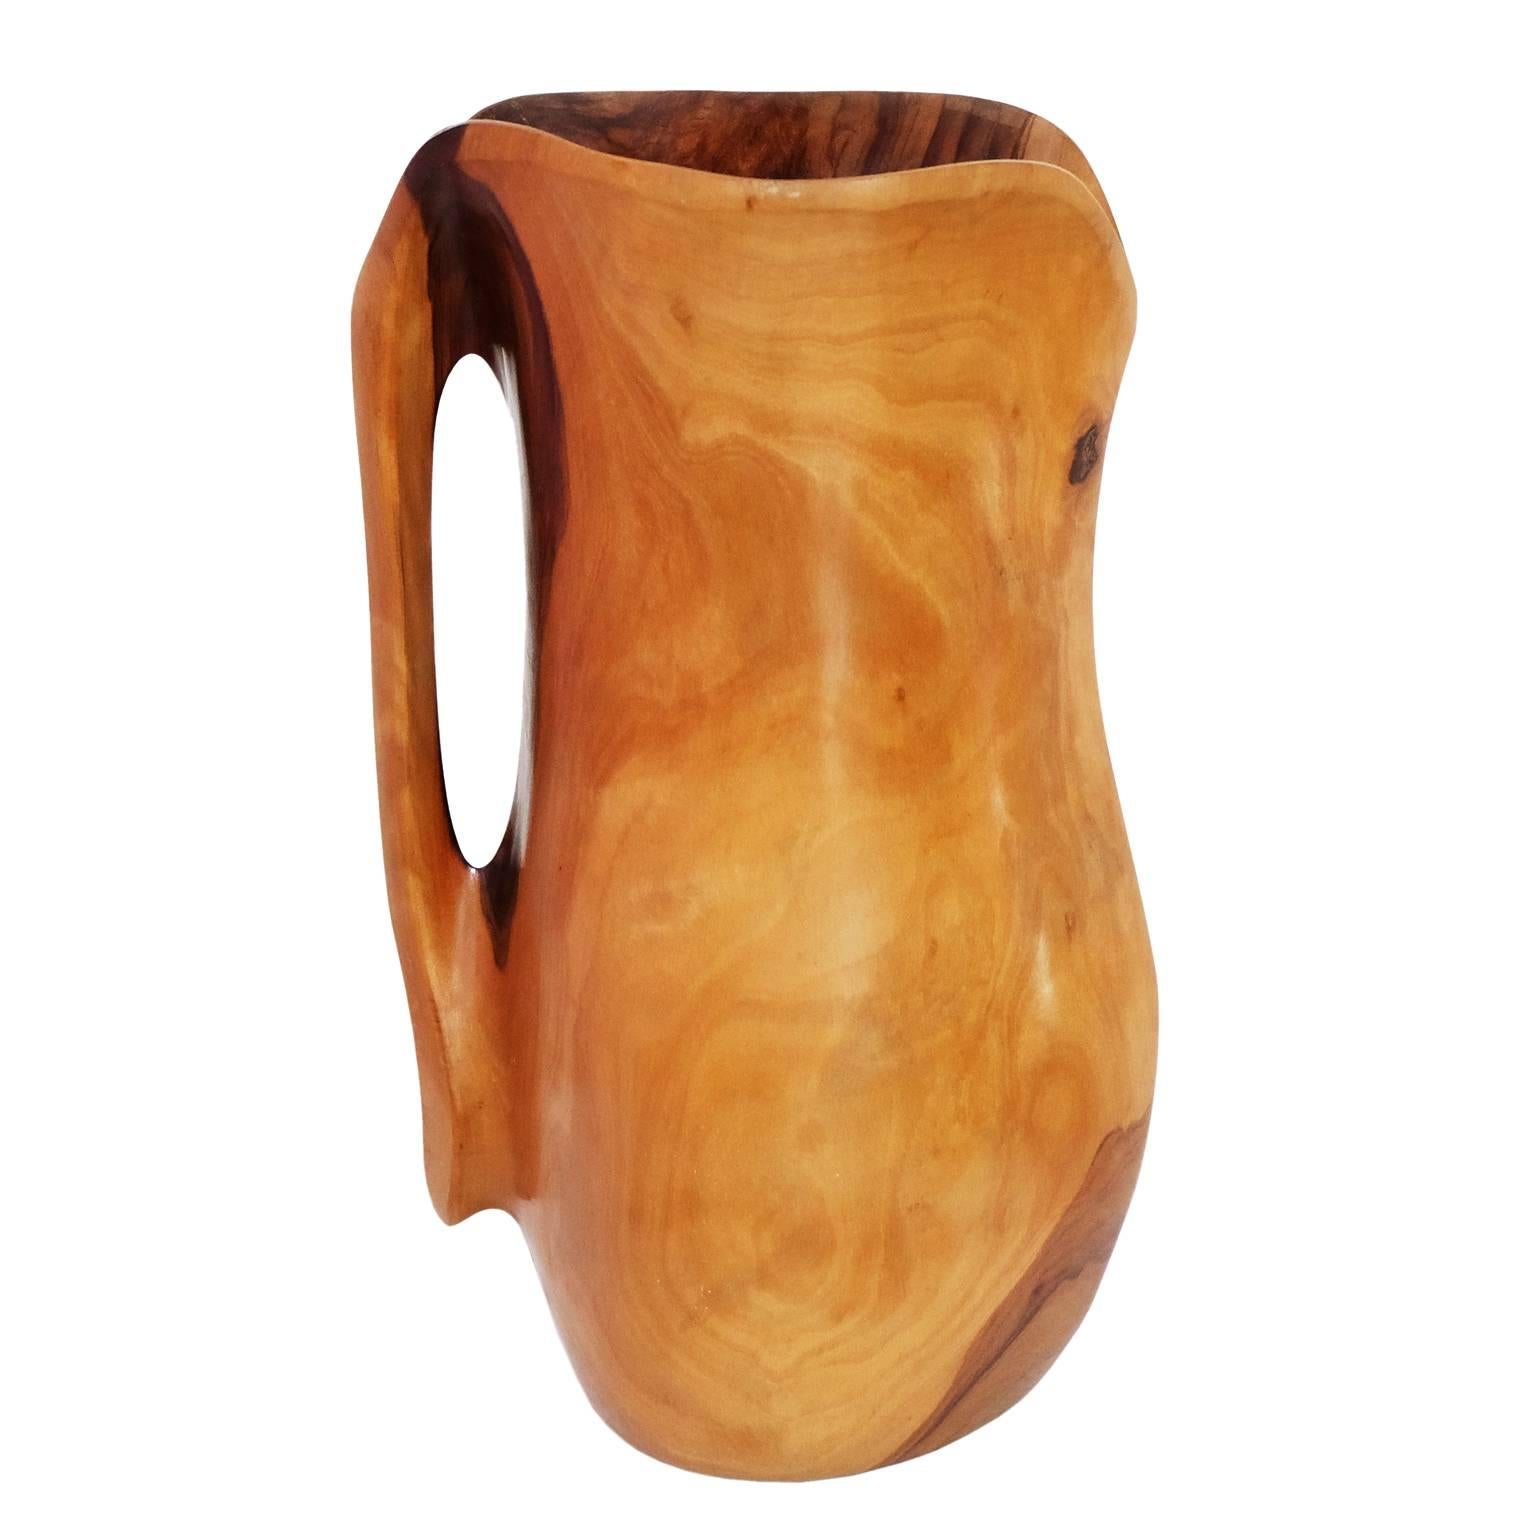 1950s hand sculptured olive wood pitcher attributed to French designer Alexandre Noll, France.

Measures: H 27 cm x W 16 cm x D 18 cm.